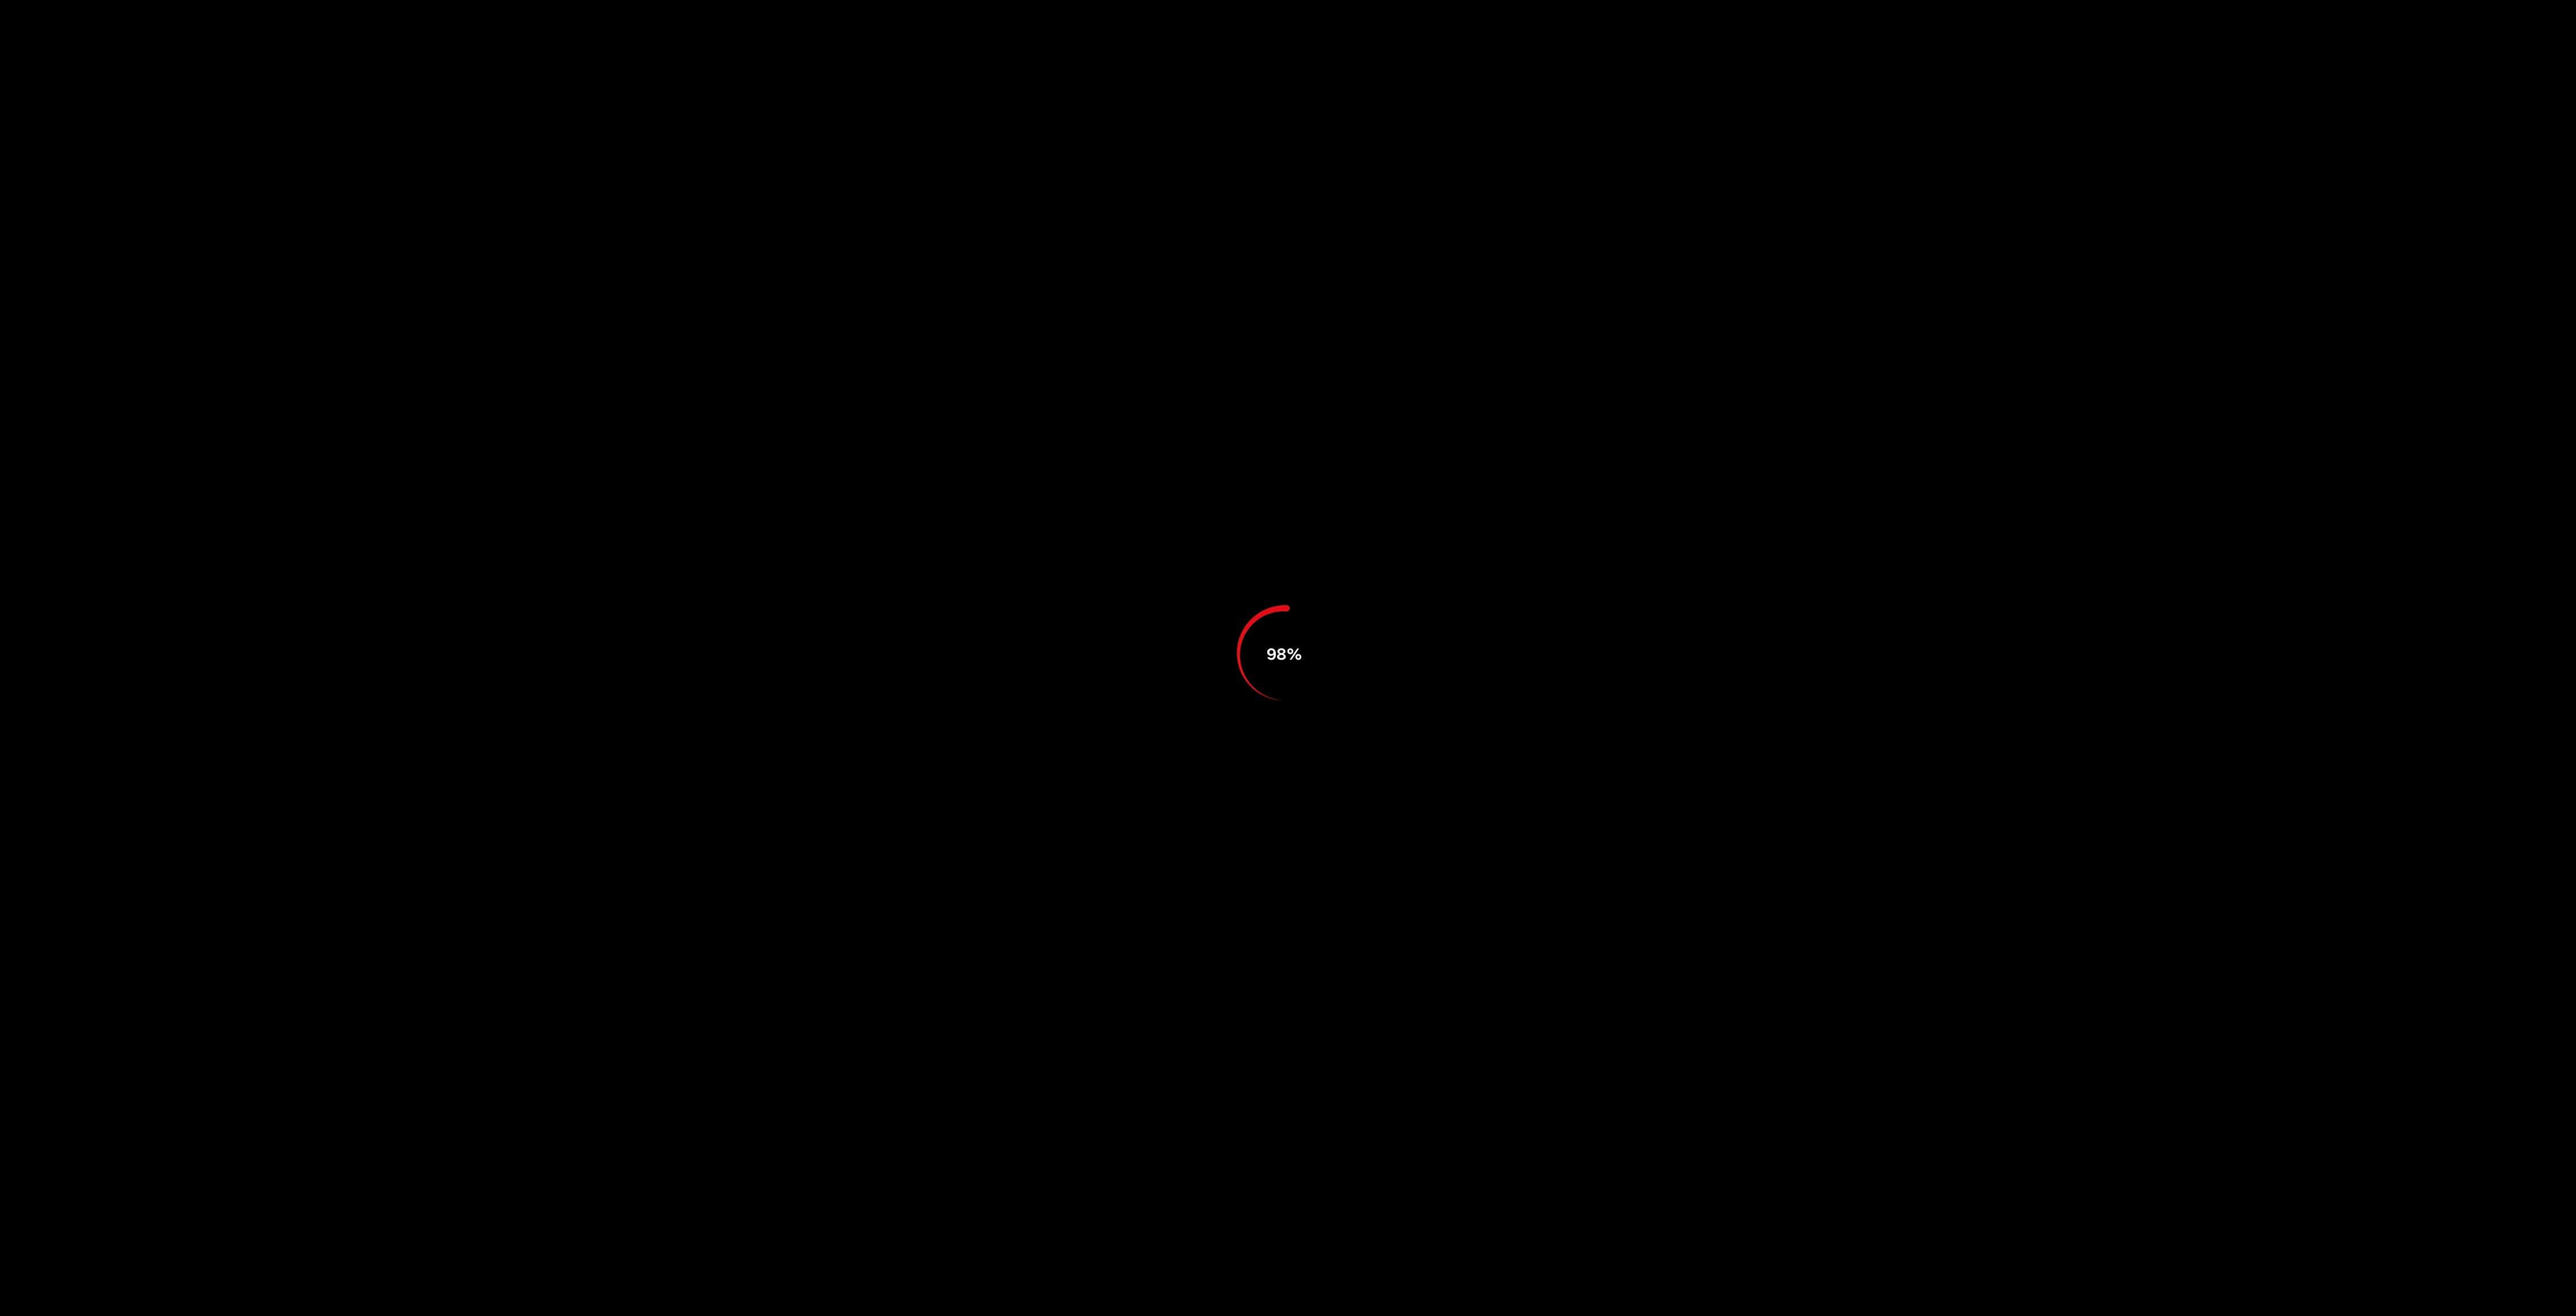 Netflix loading screen with 98% icon